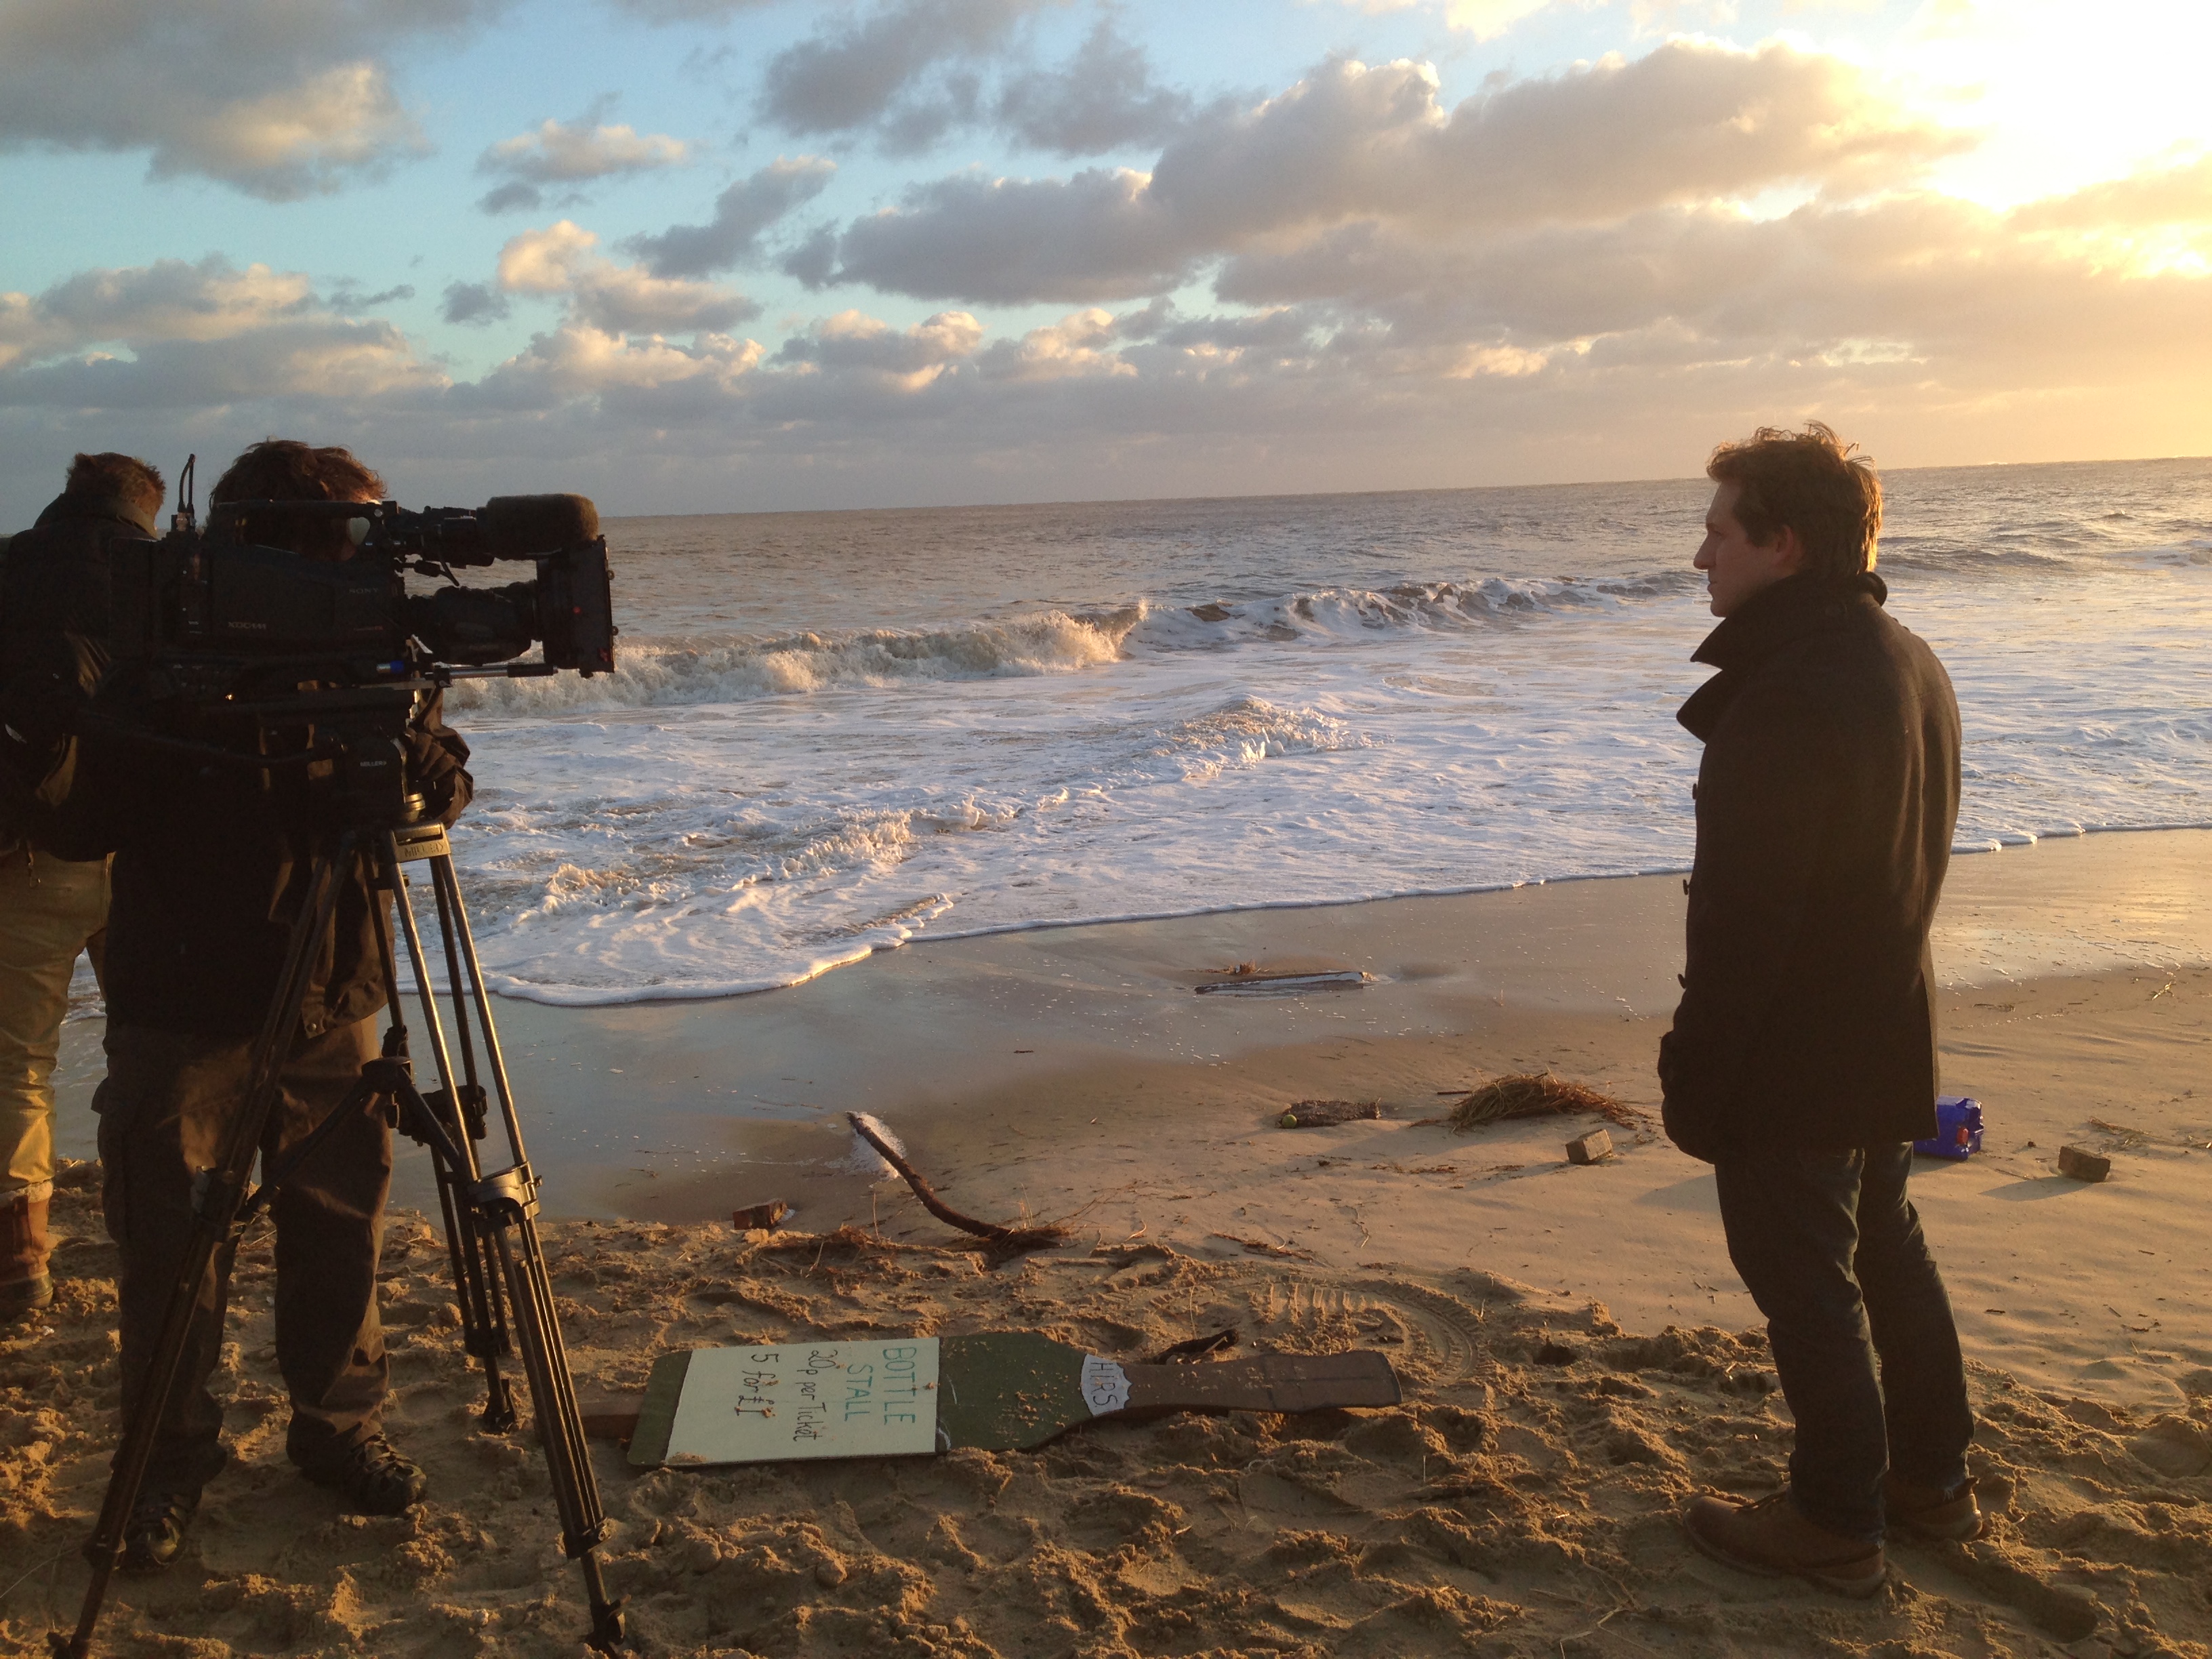 I will never forget' - ITV News Anglia presenter David Whiteley's memories  of 2013 storm surge